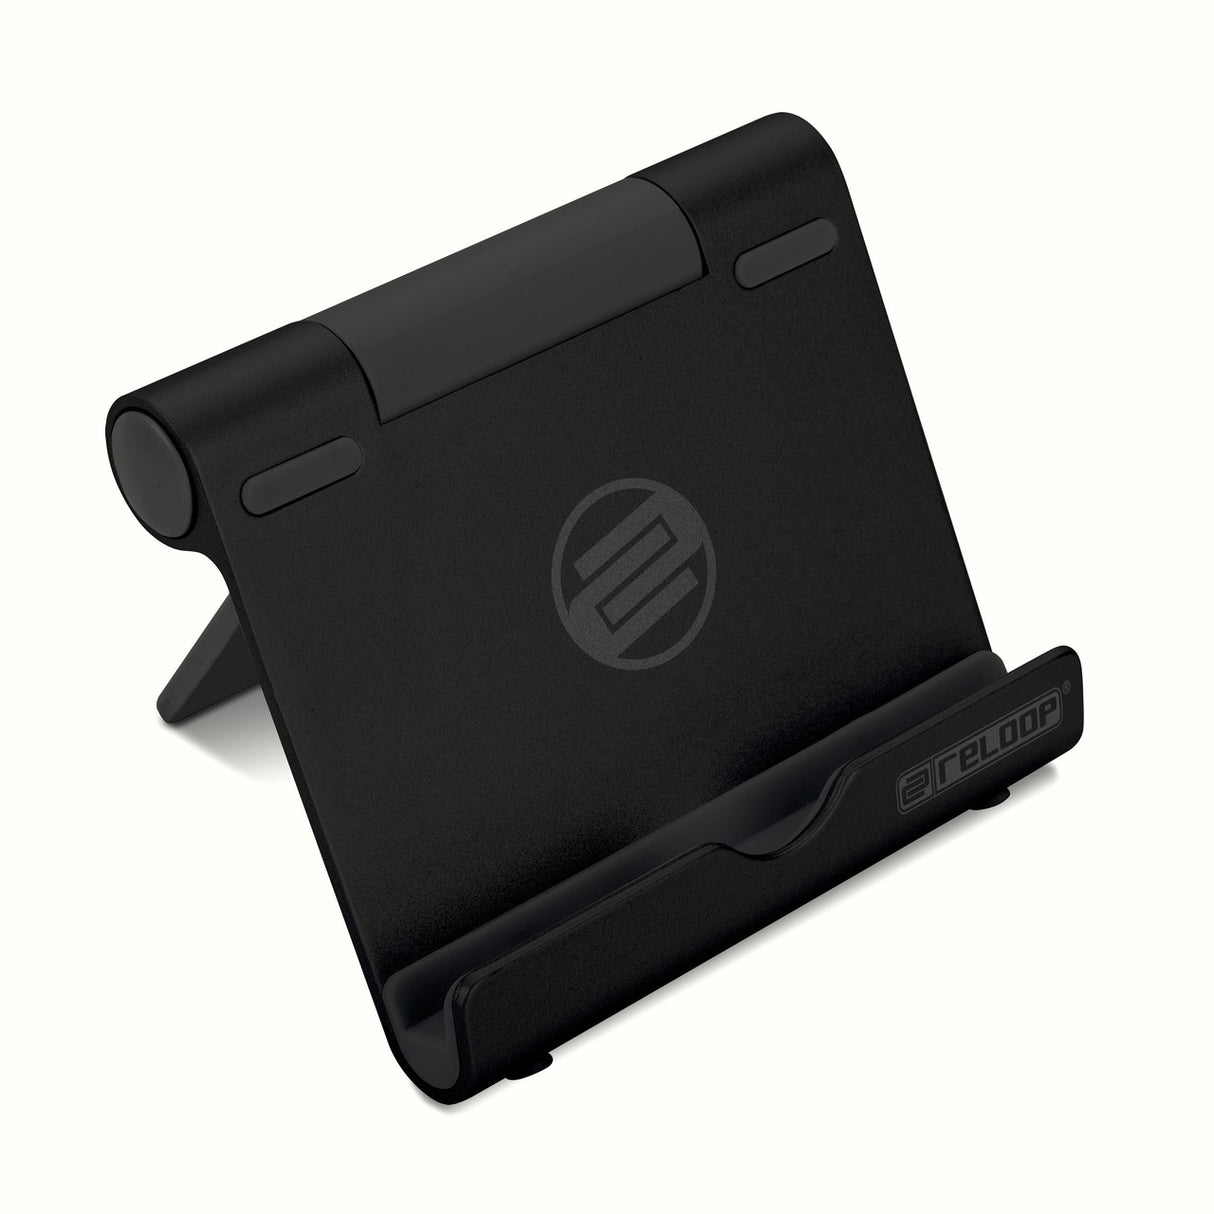 Reloop Tablet Stand | Optional Stand for iPads, Tablets, iPhones and Androids